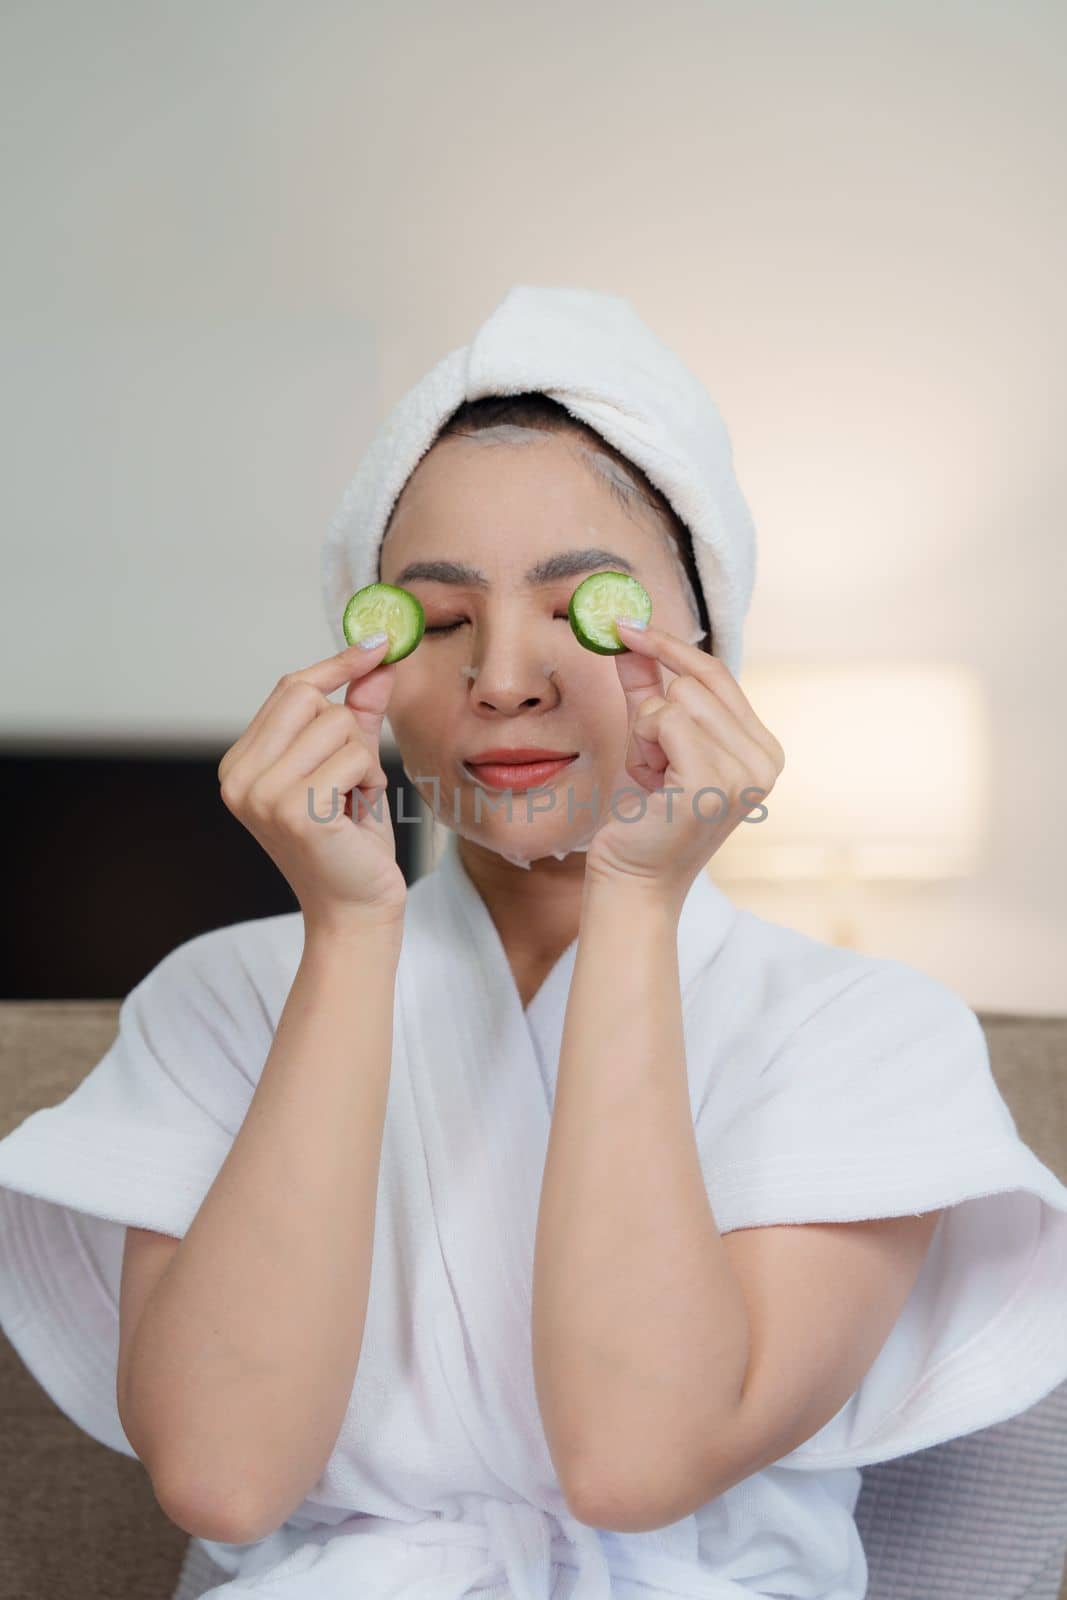 Woman with facial mask at home. Skin care, face treatment, spa, cosmetology and natural beauty concept.